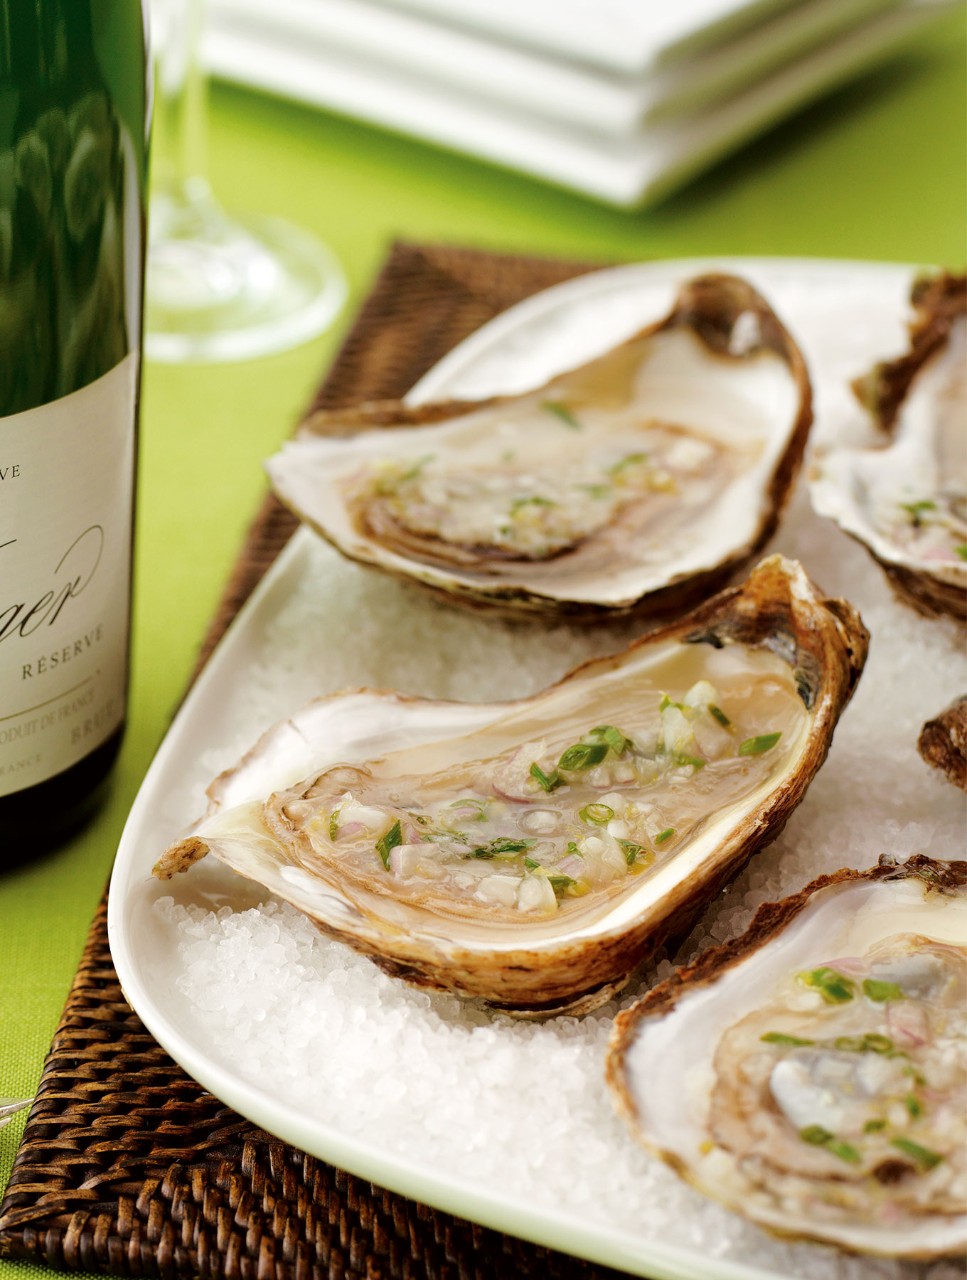 Malpeque Oysters with Lemon, Chive and Shallot Mignonette Sauce